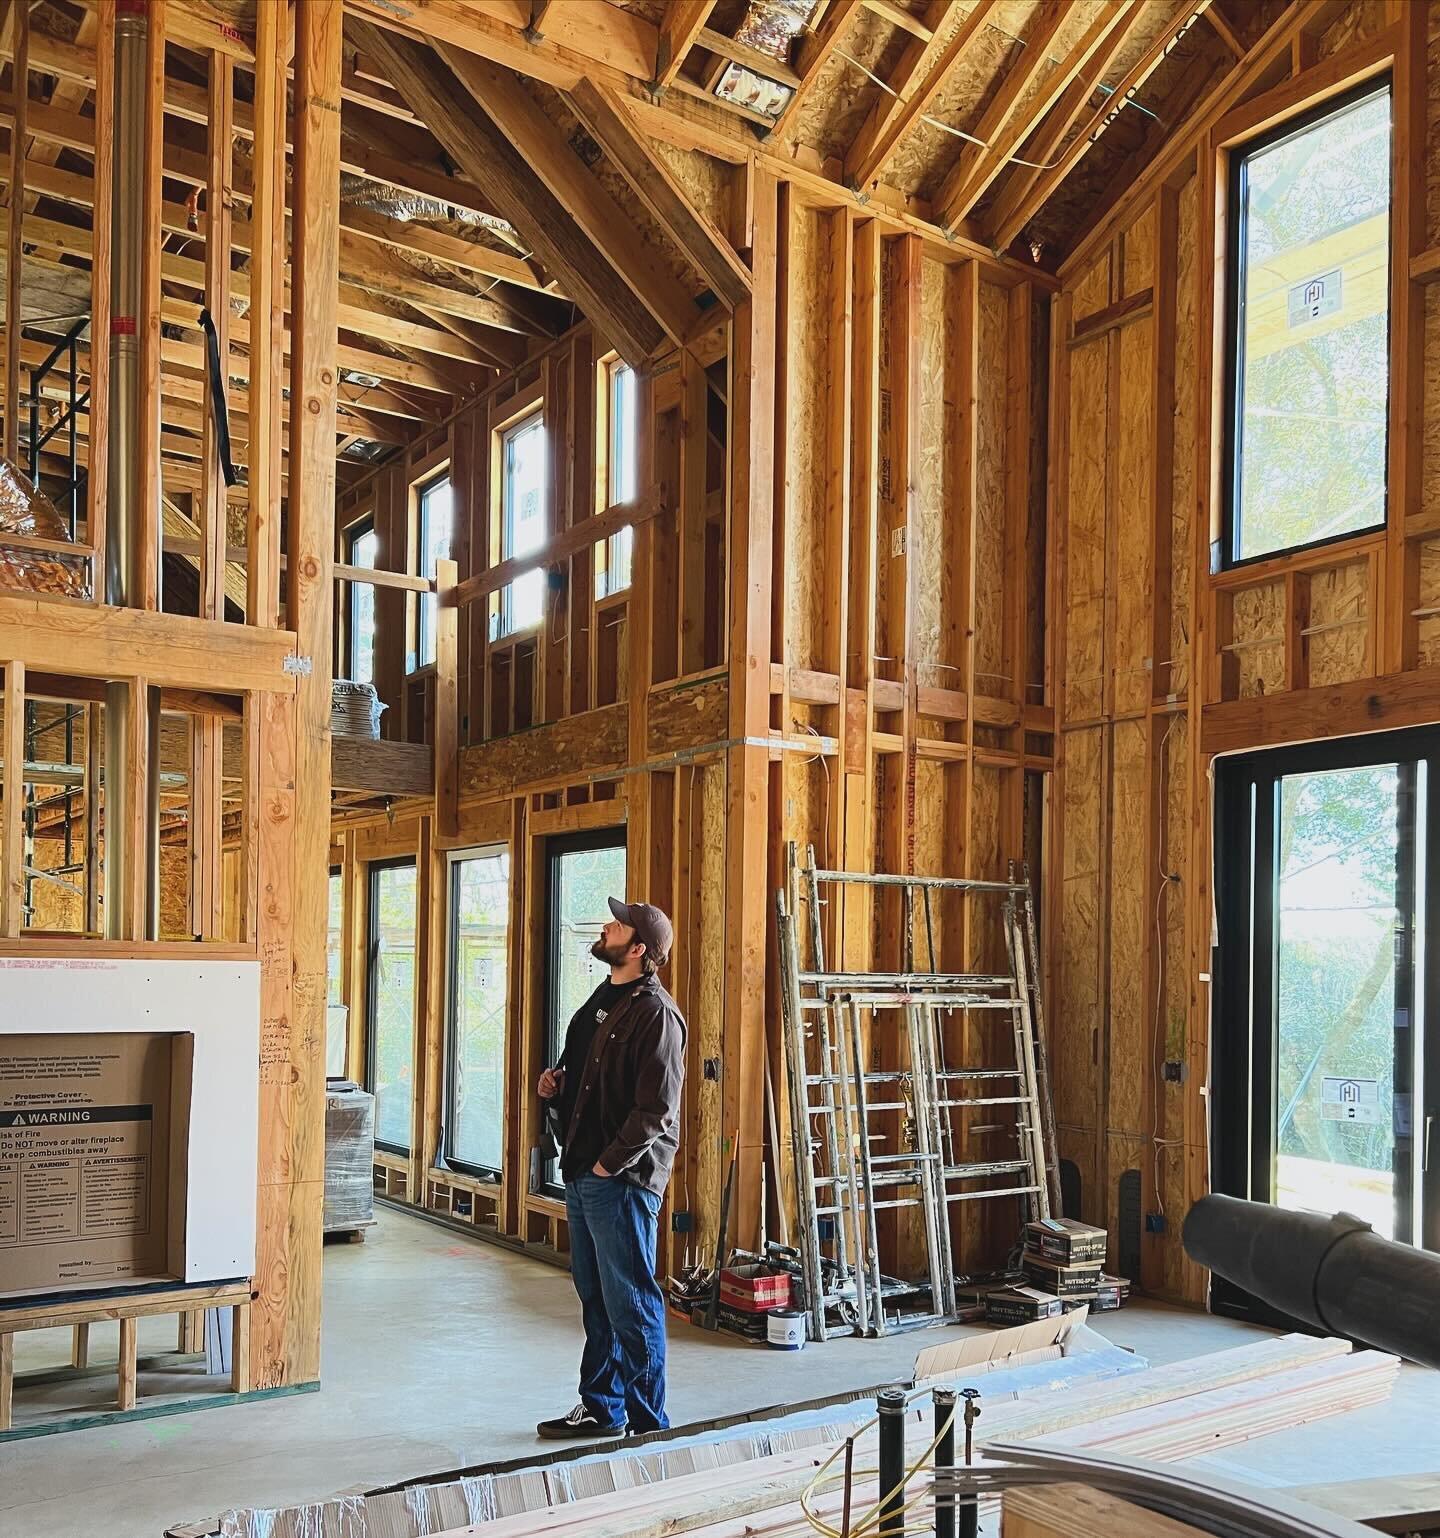 We love tall ceilings! So much natural light in this beautiful home. 😍 #greyscalehomes #greyscaleinc #sanfranciscodesign #sacramentohomes #bayareadesign #bayareadrafting #sacramentodrafting #customhome #drafter #sacramentodesign #drafters #developme